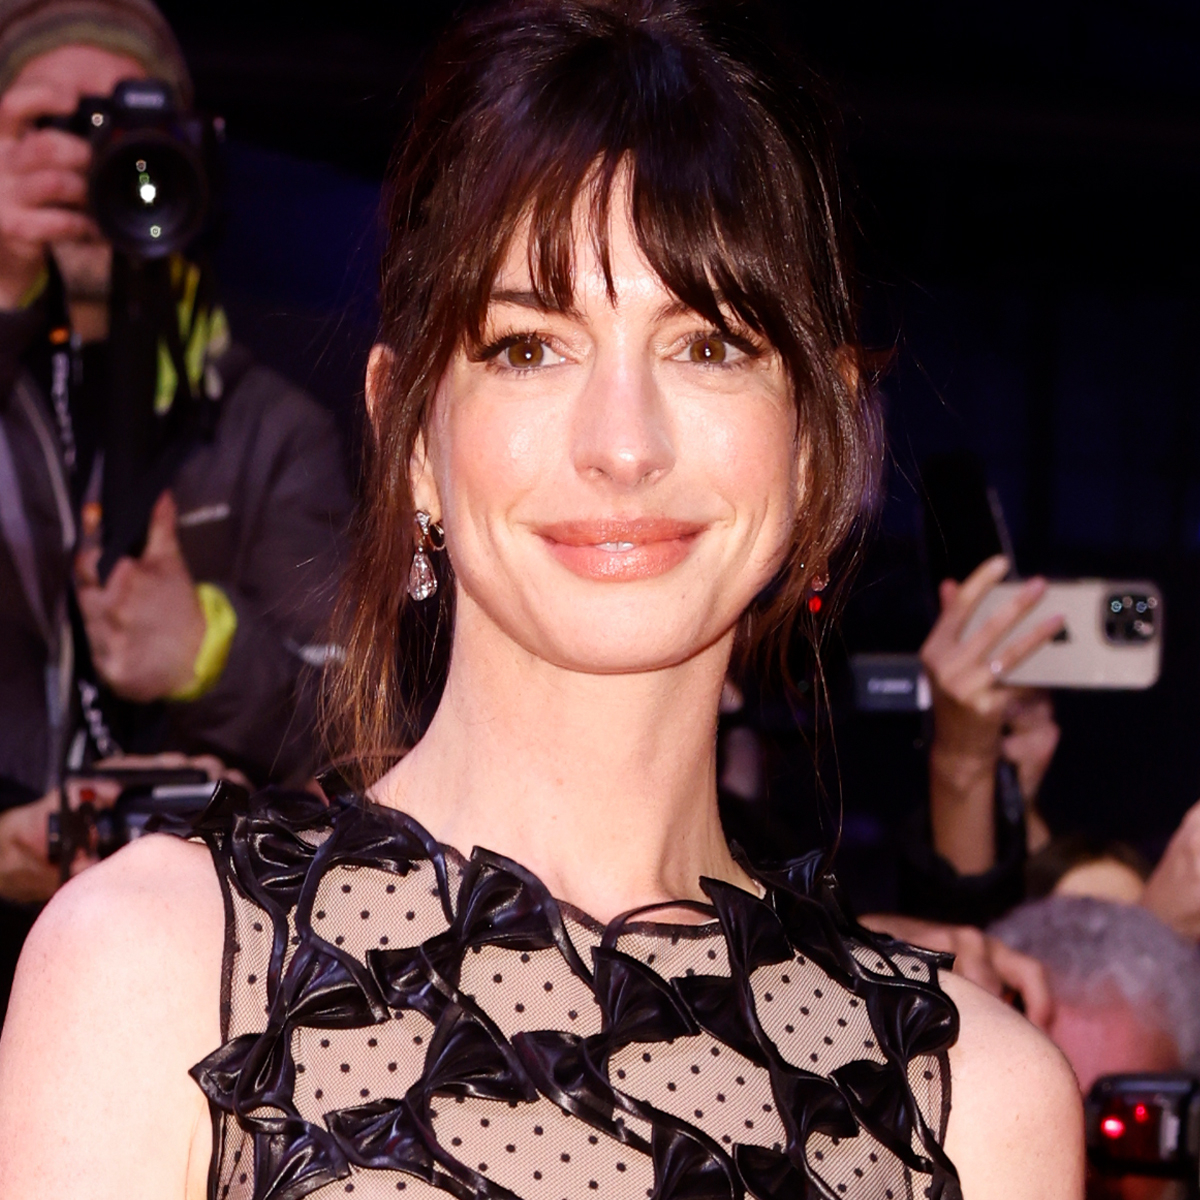 Anne Hathaway Turns Up the Heat With Dominatrix-Style Naked Dress – E! Online